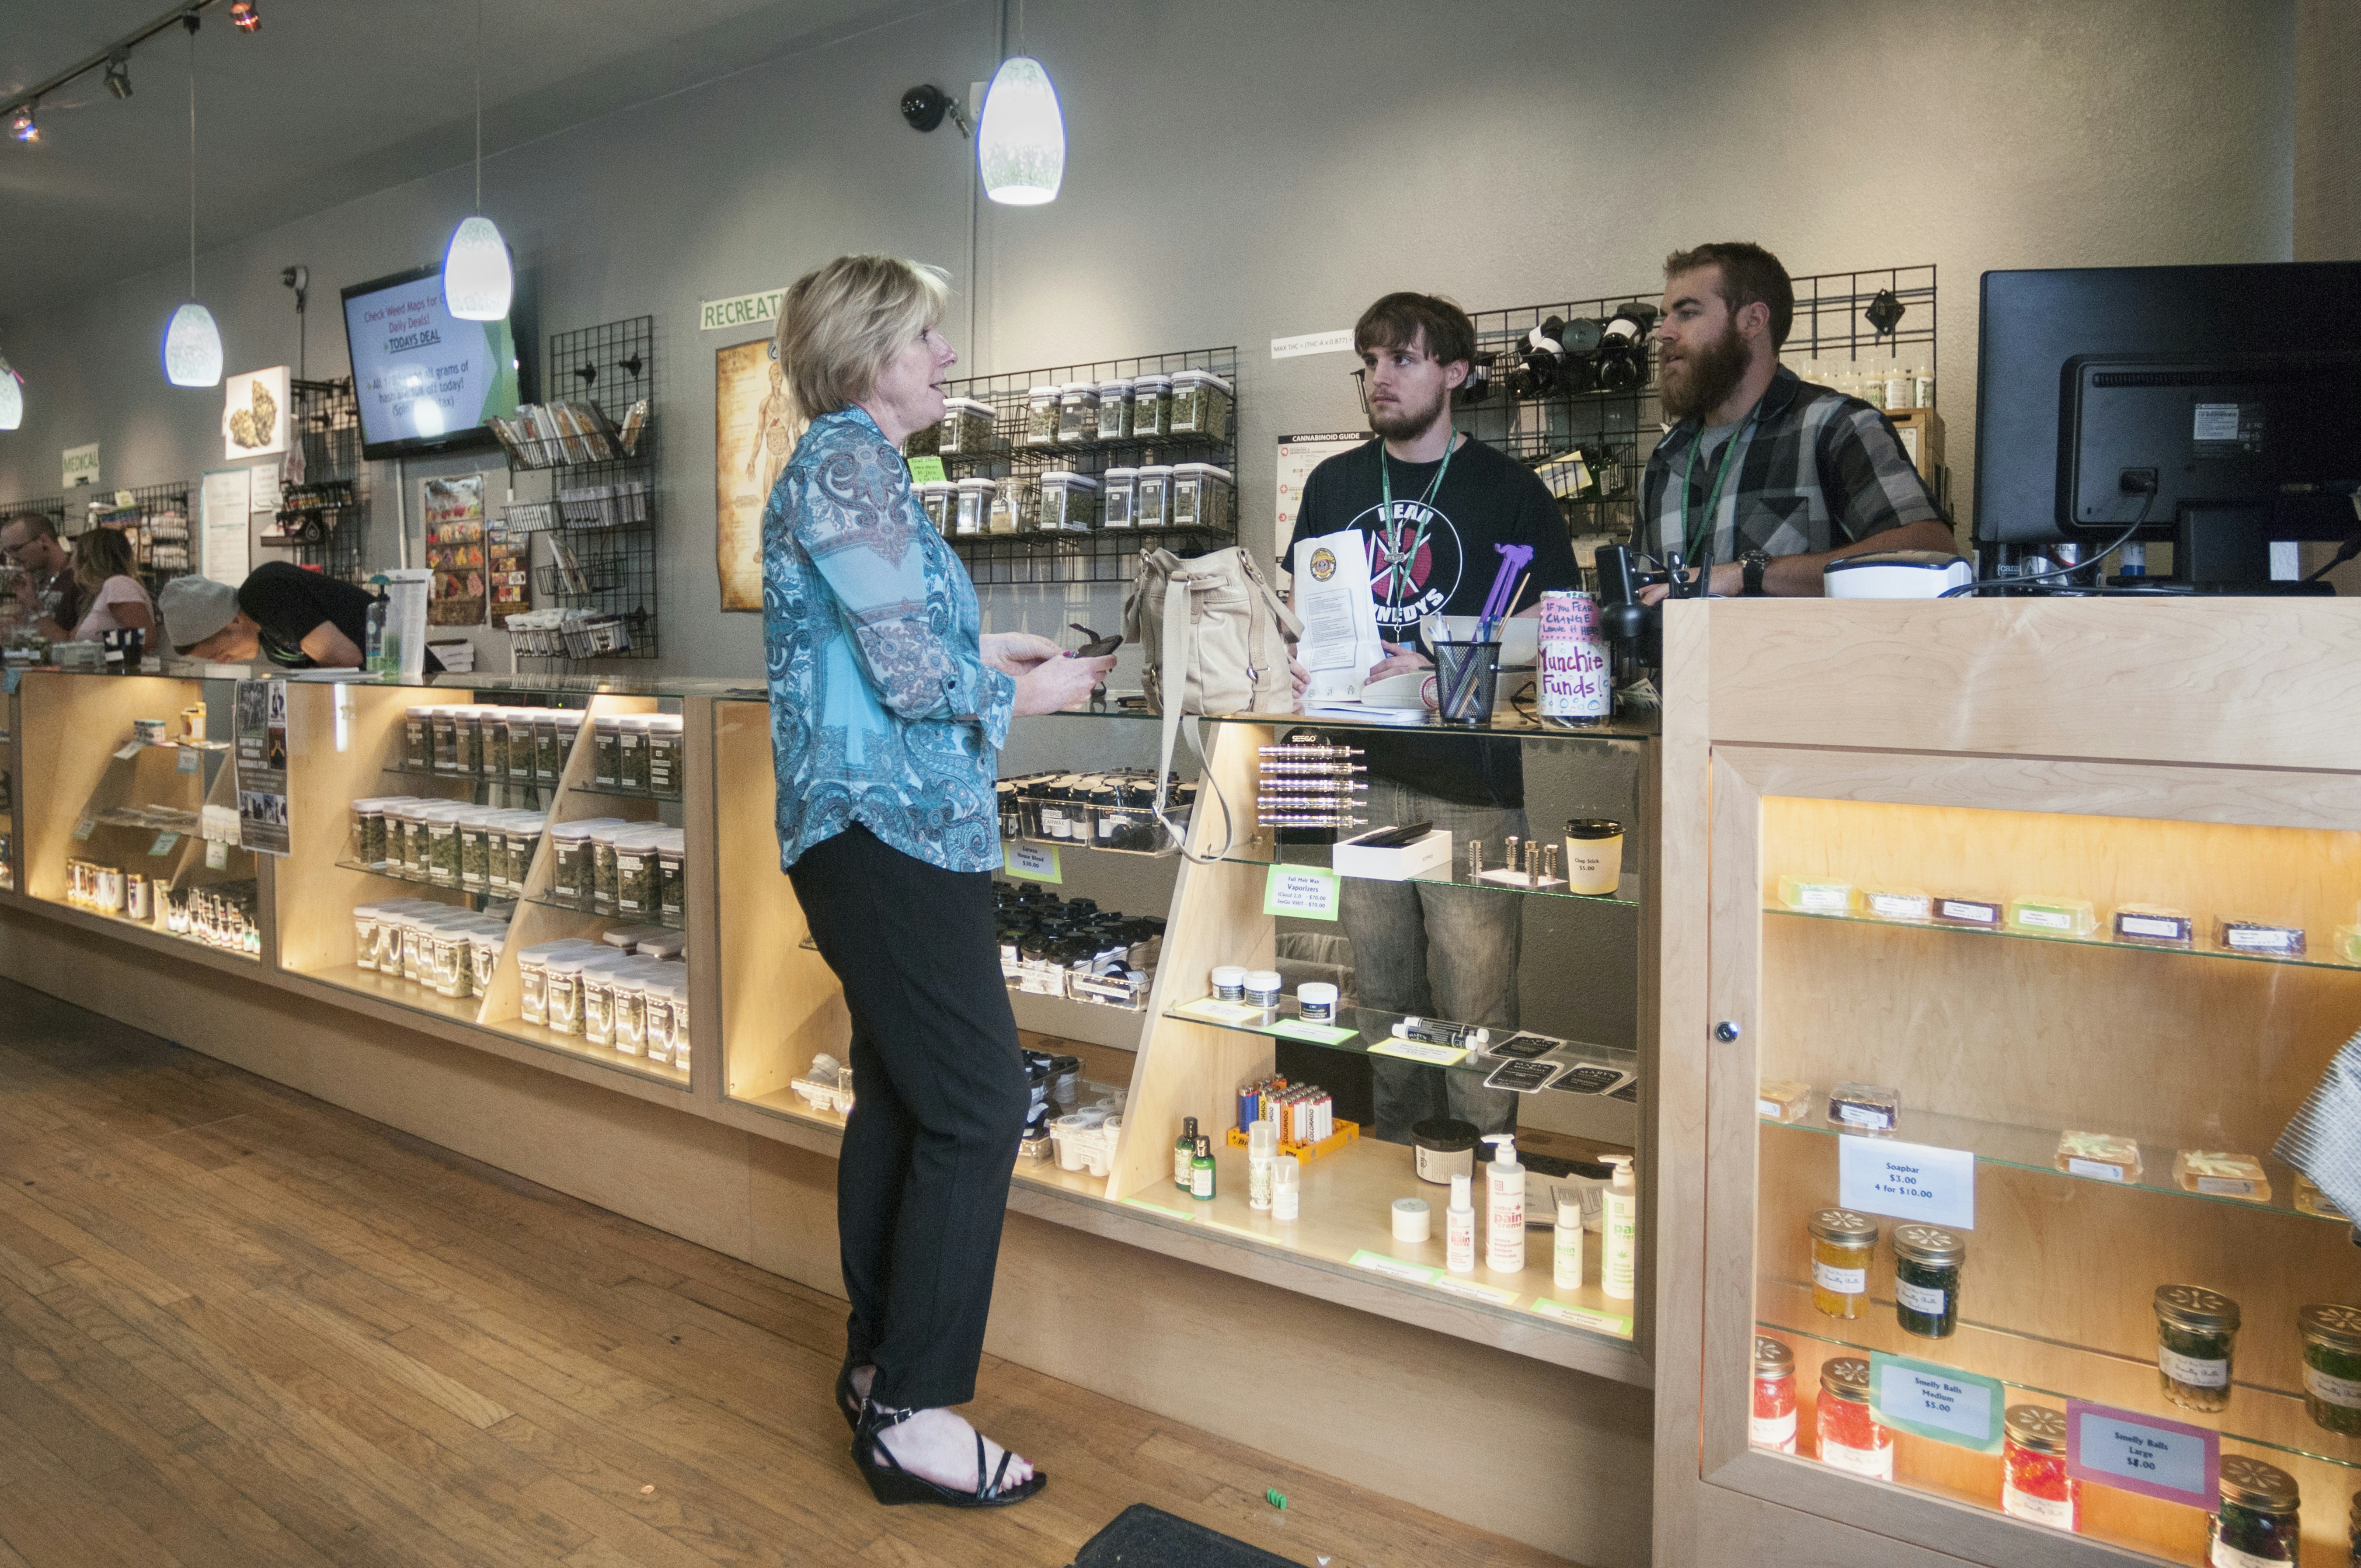 A middle aged white woman with short blond hair in a blue floral tunic, black slacks, and black sandals speaks with two budtenders at a Denver, Colorado cannabis dispensary. A long display case and counter made of blonde wood and glass shows cases a variety of edible and topical cannabis products and concentrates, while jars of flower sit on shelves on the wall